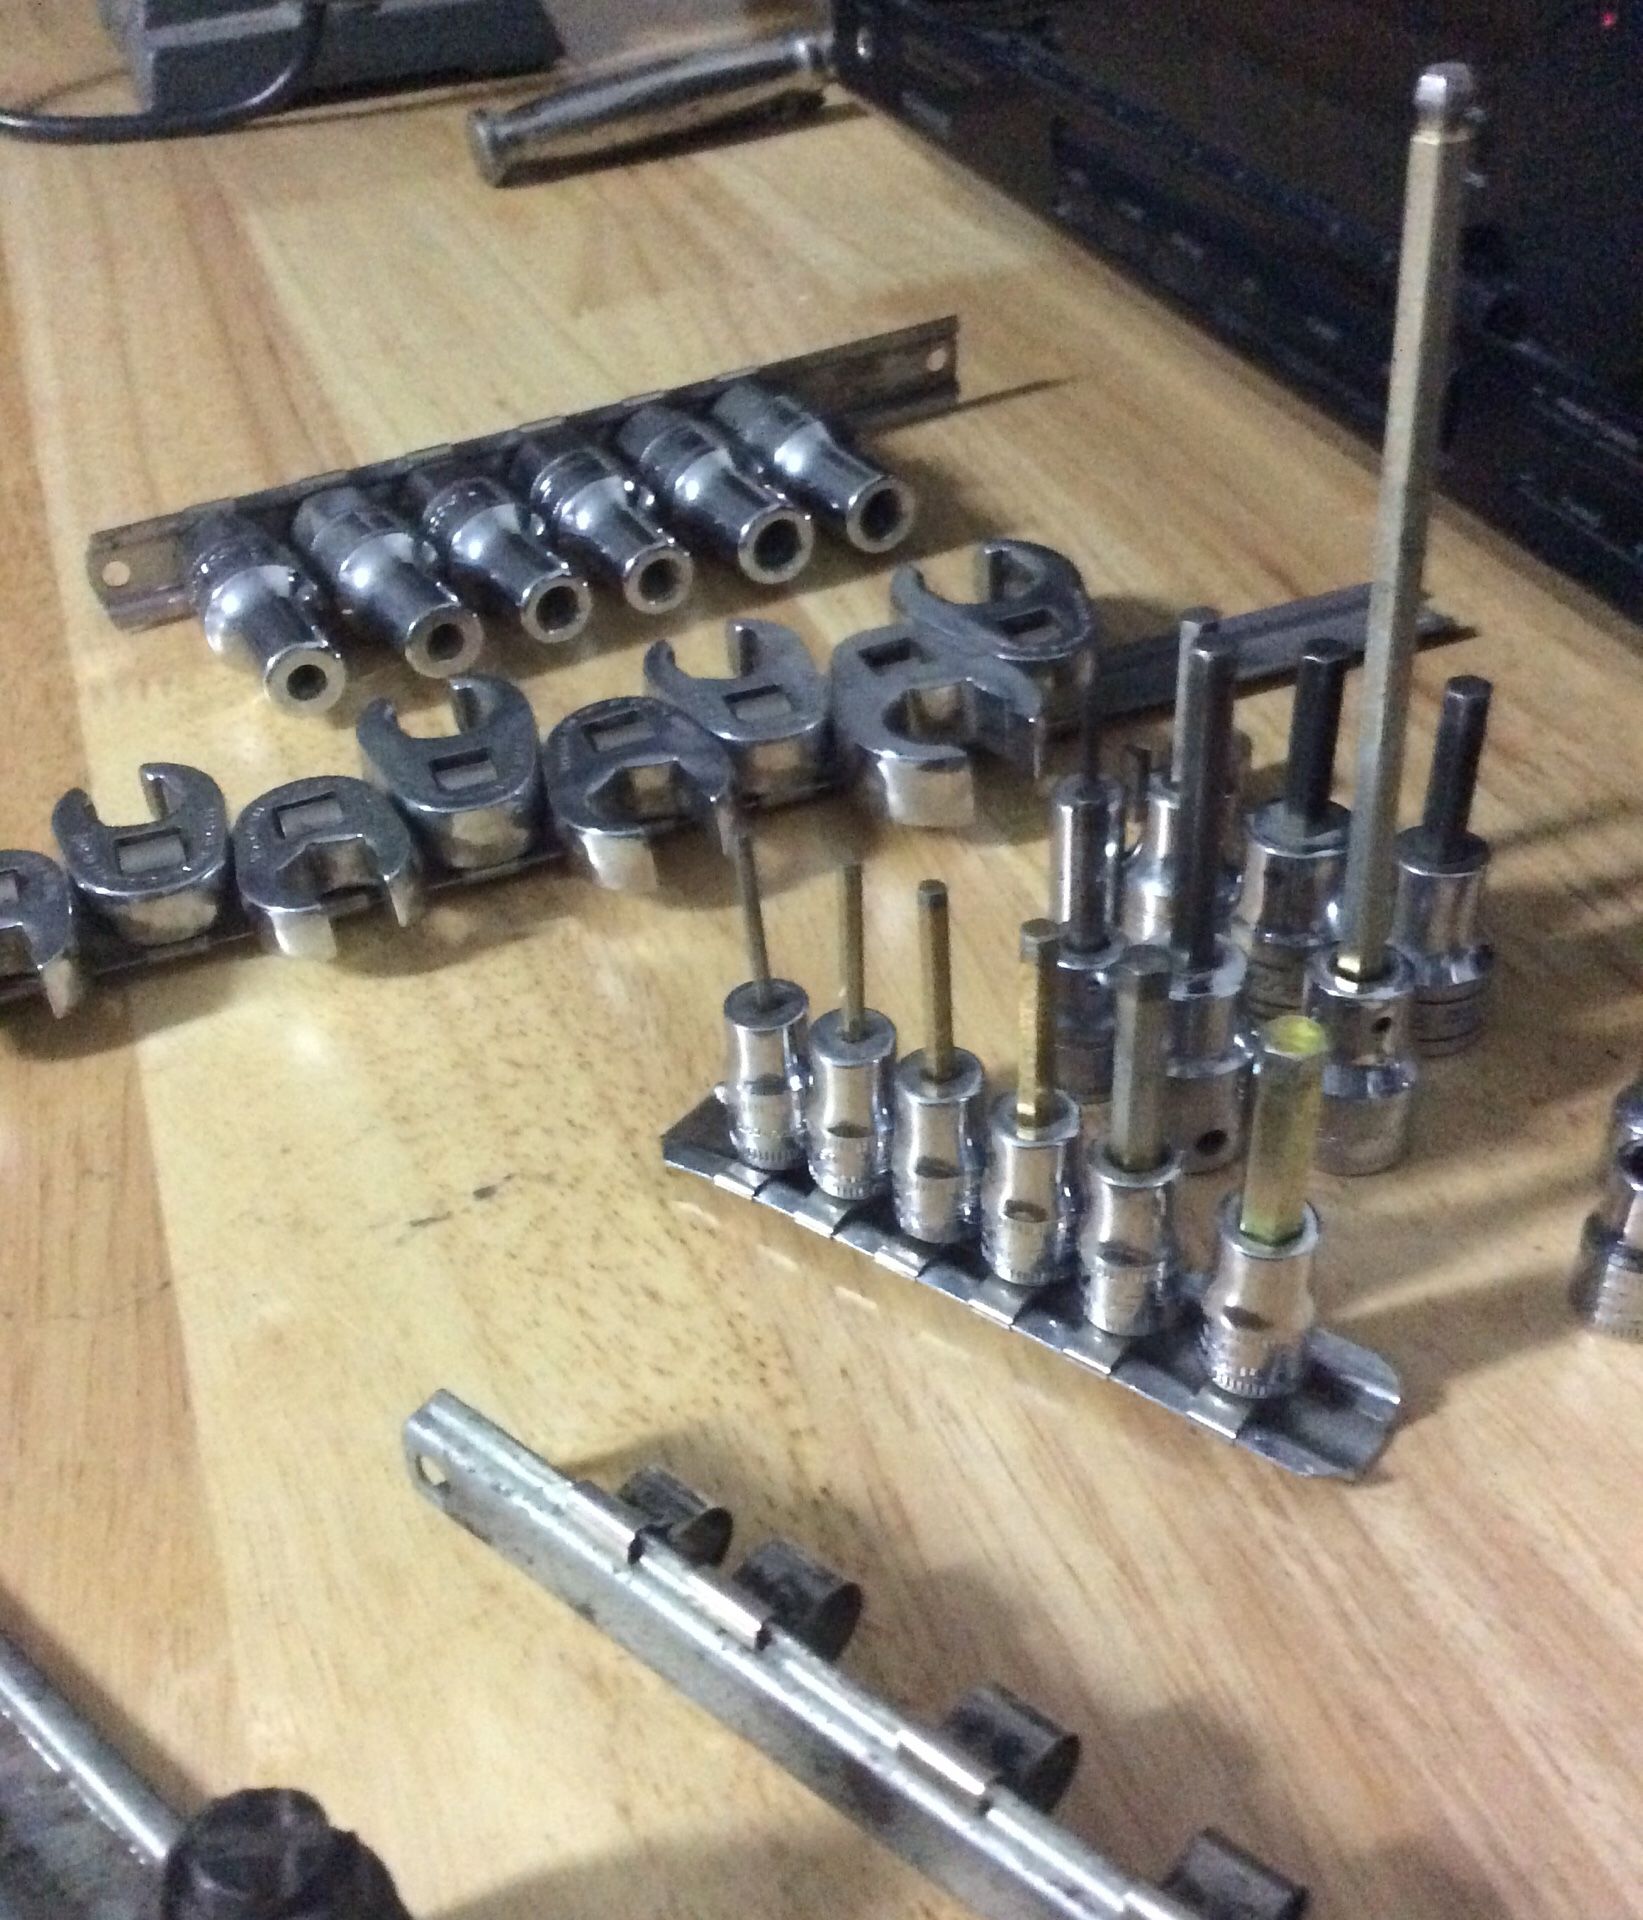 Snap on tools,crows foot ,hex sockets, stud installer and other specialty